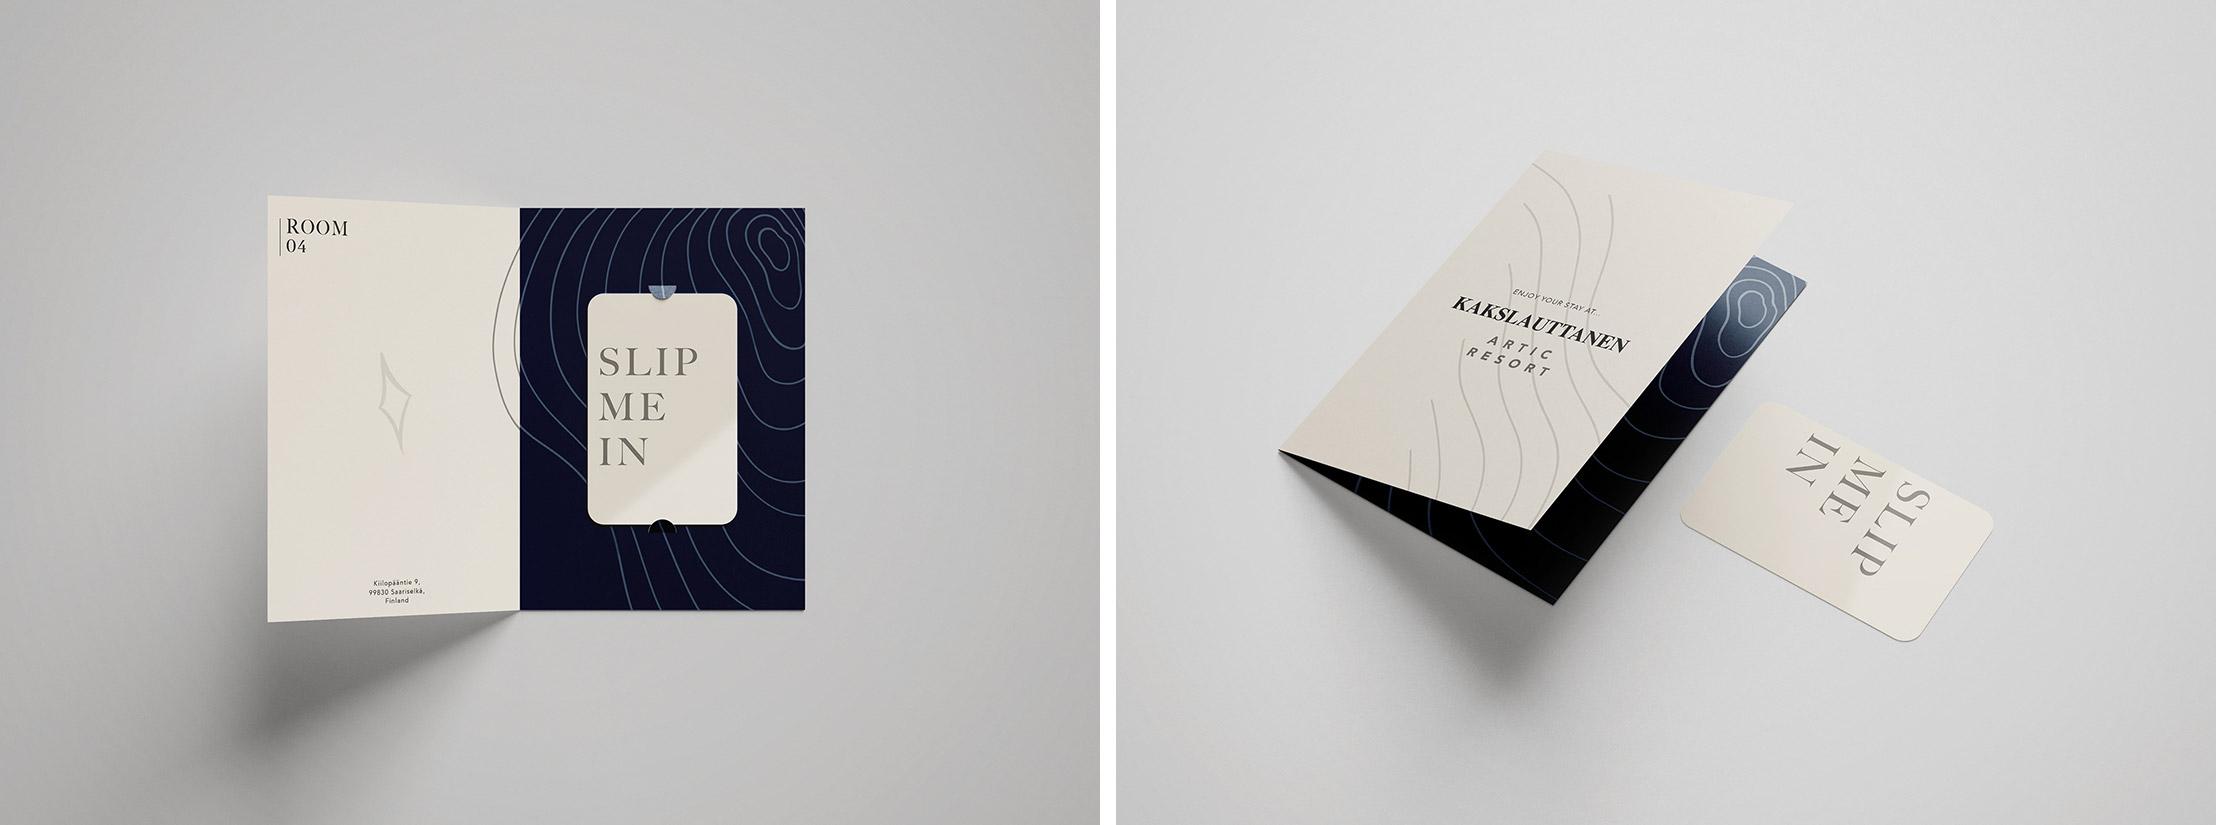 Mock-up visual identity applied to hotel room swipe card holder